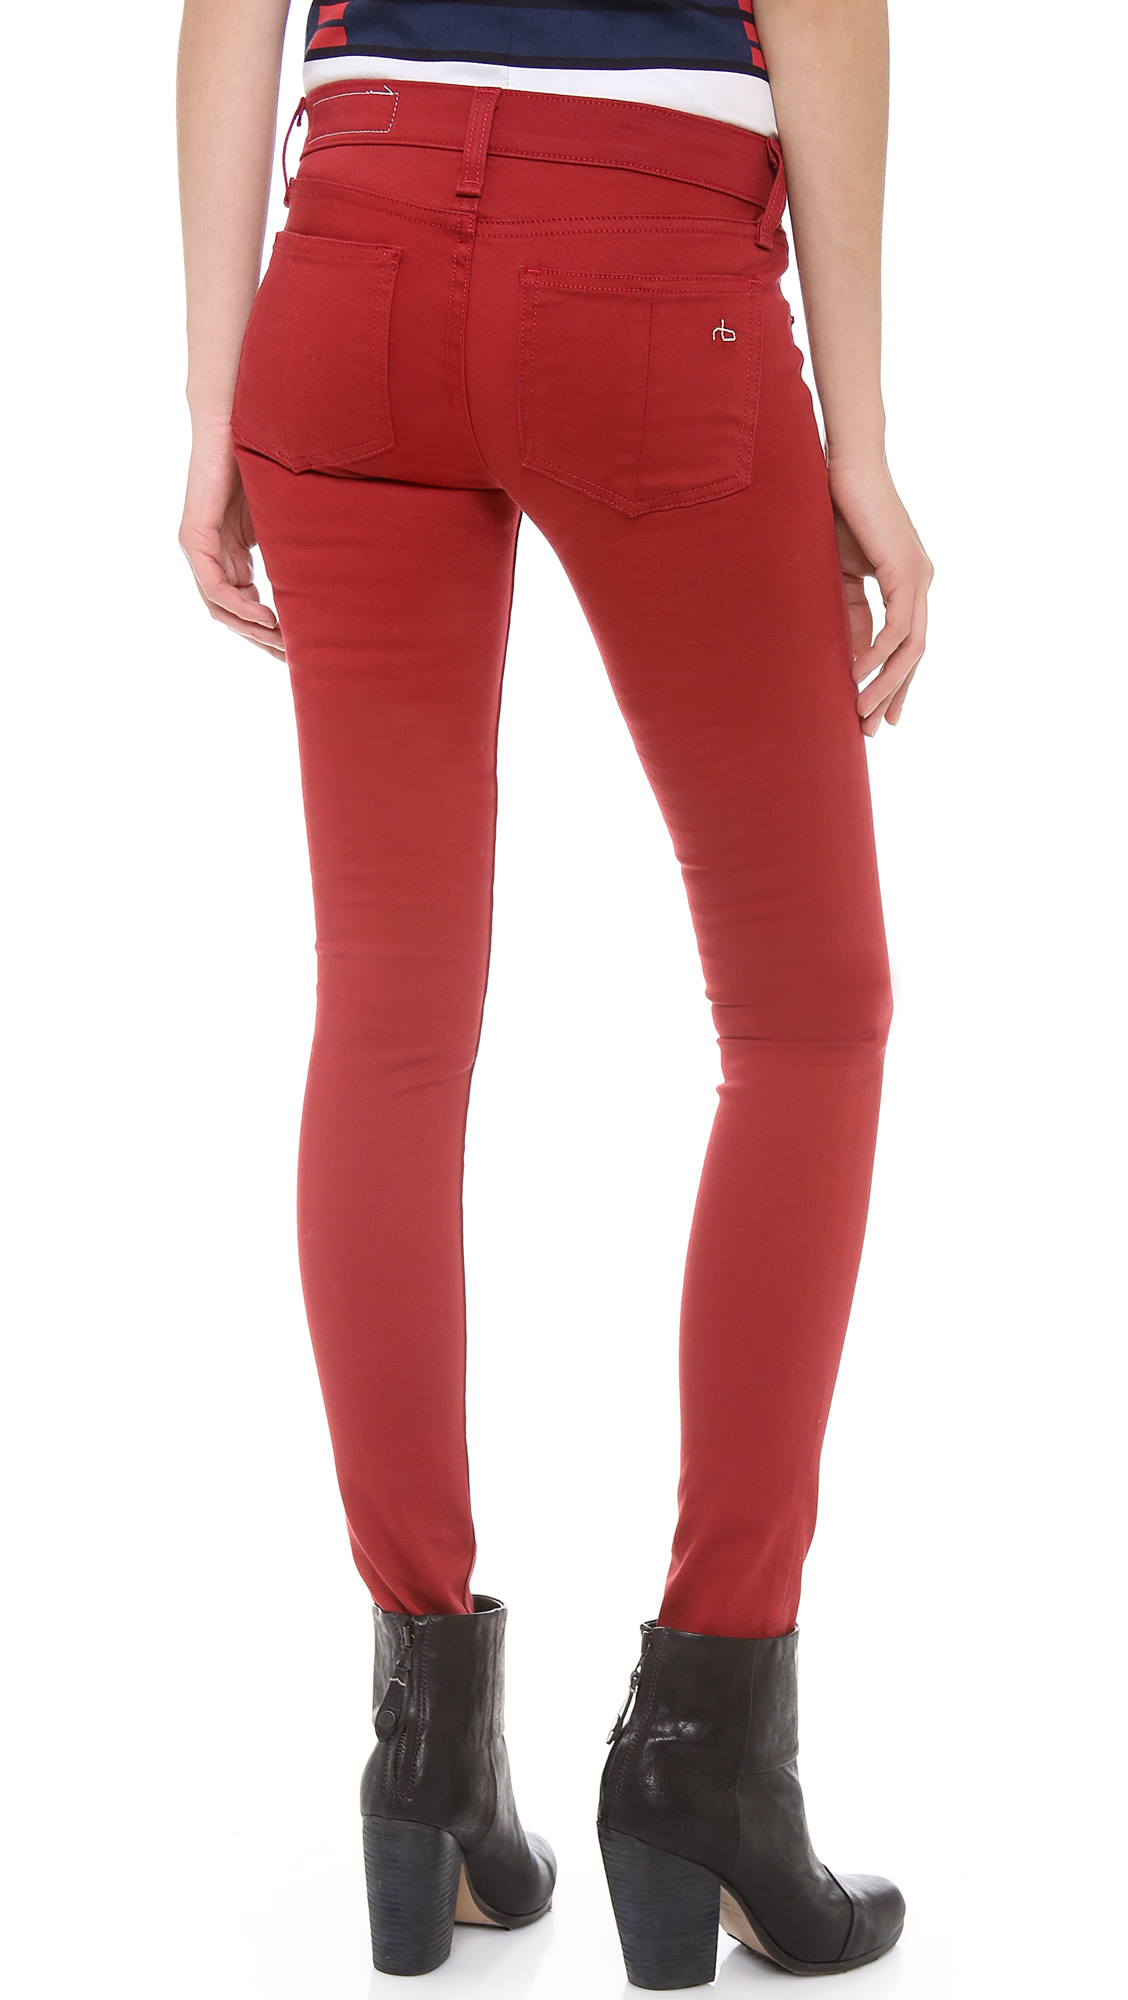 A model wearing red sateen jeans with a slight flare